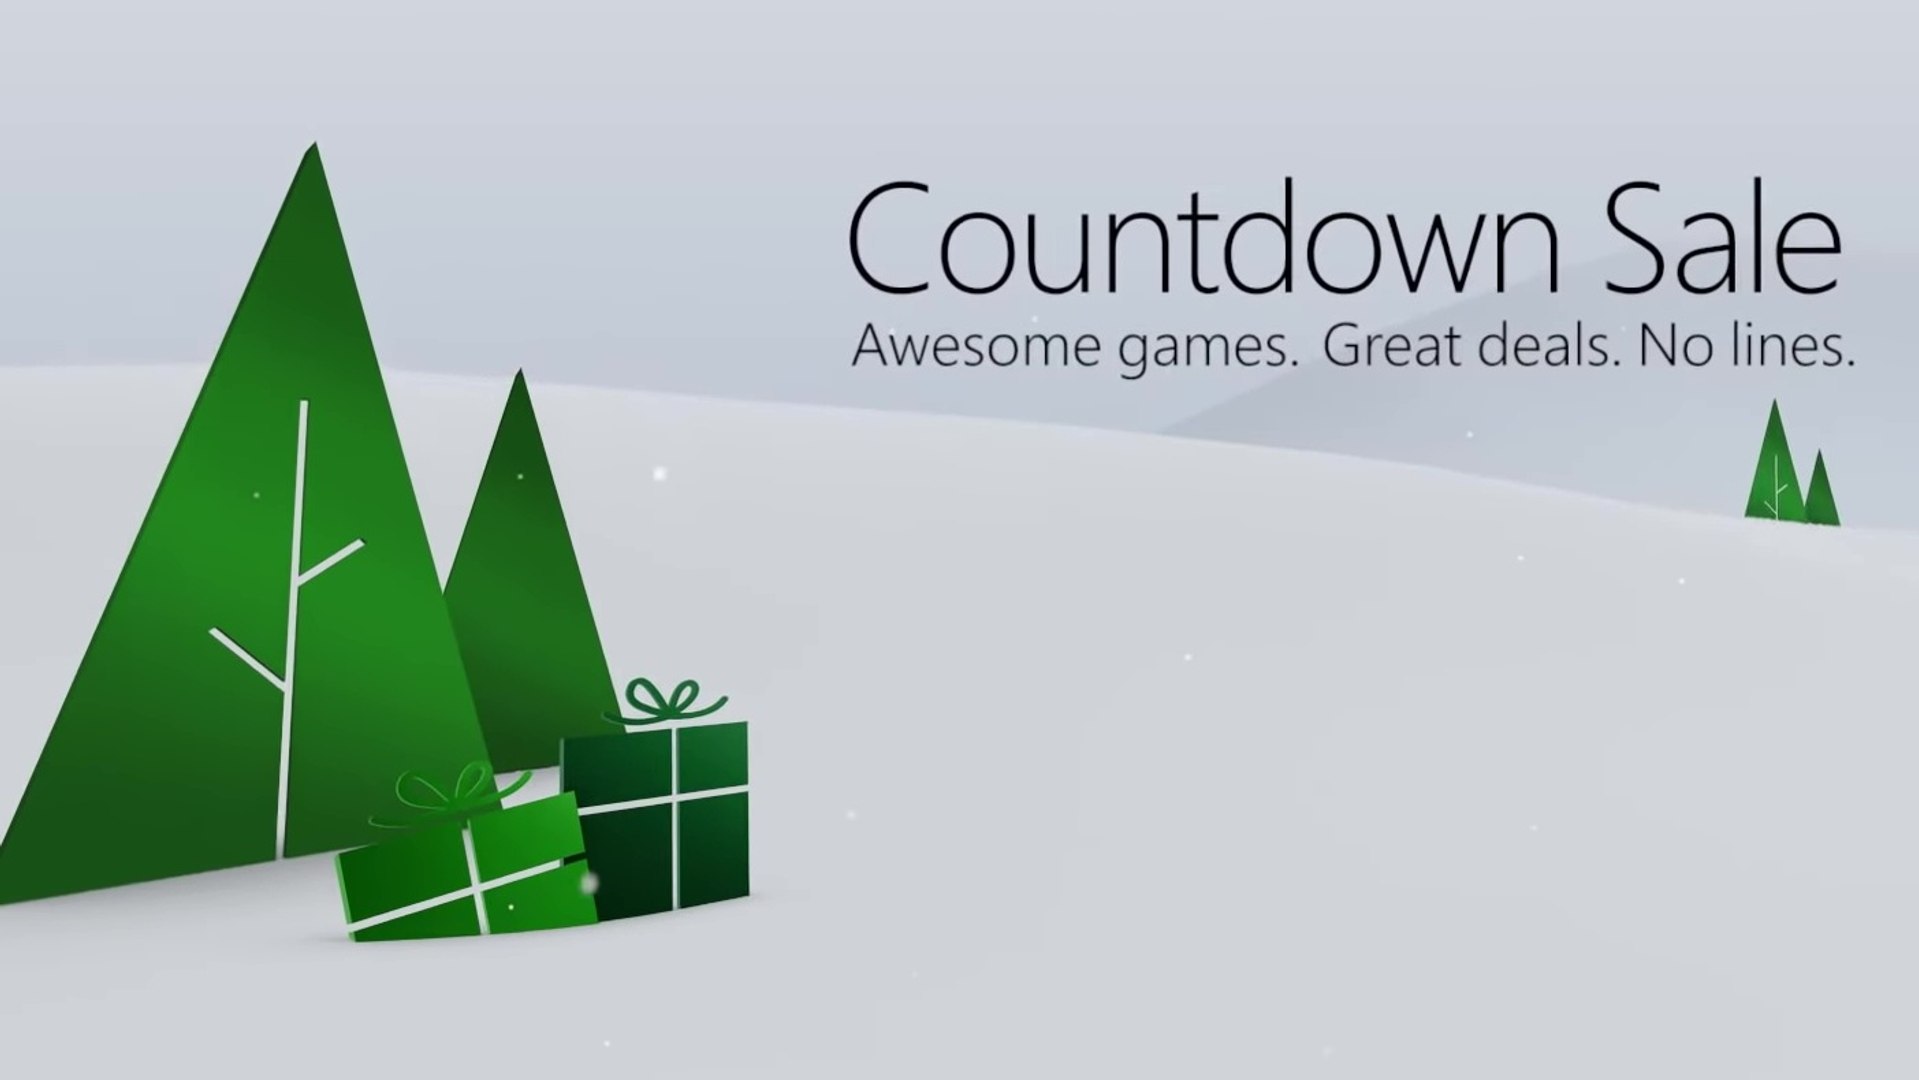 The Xbox 2019 Countdown Sale (December 19, 2019 - January 2, 2020) - video  Dailymotion